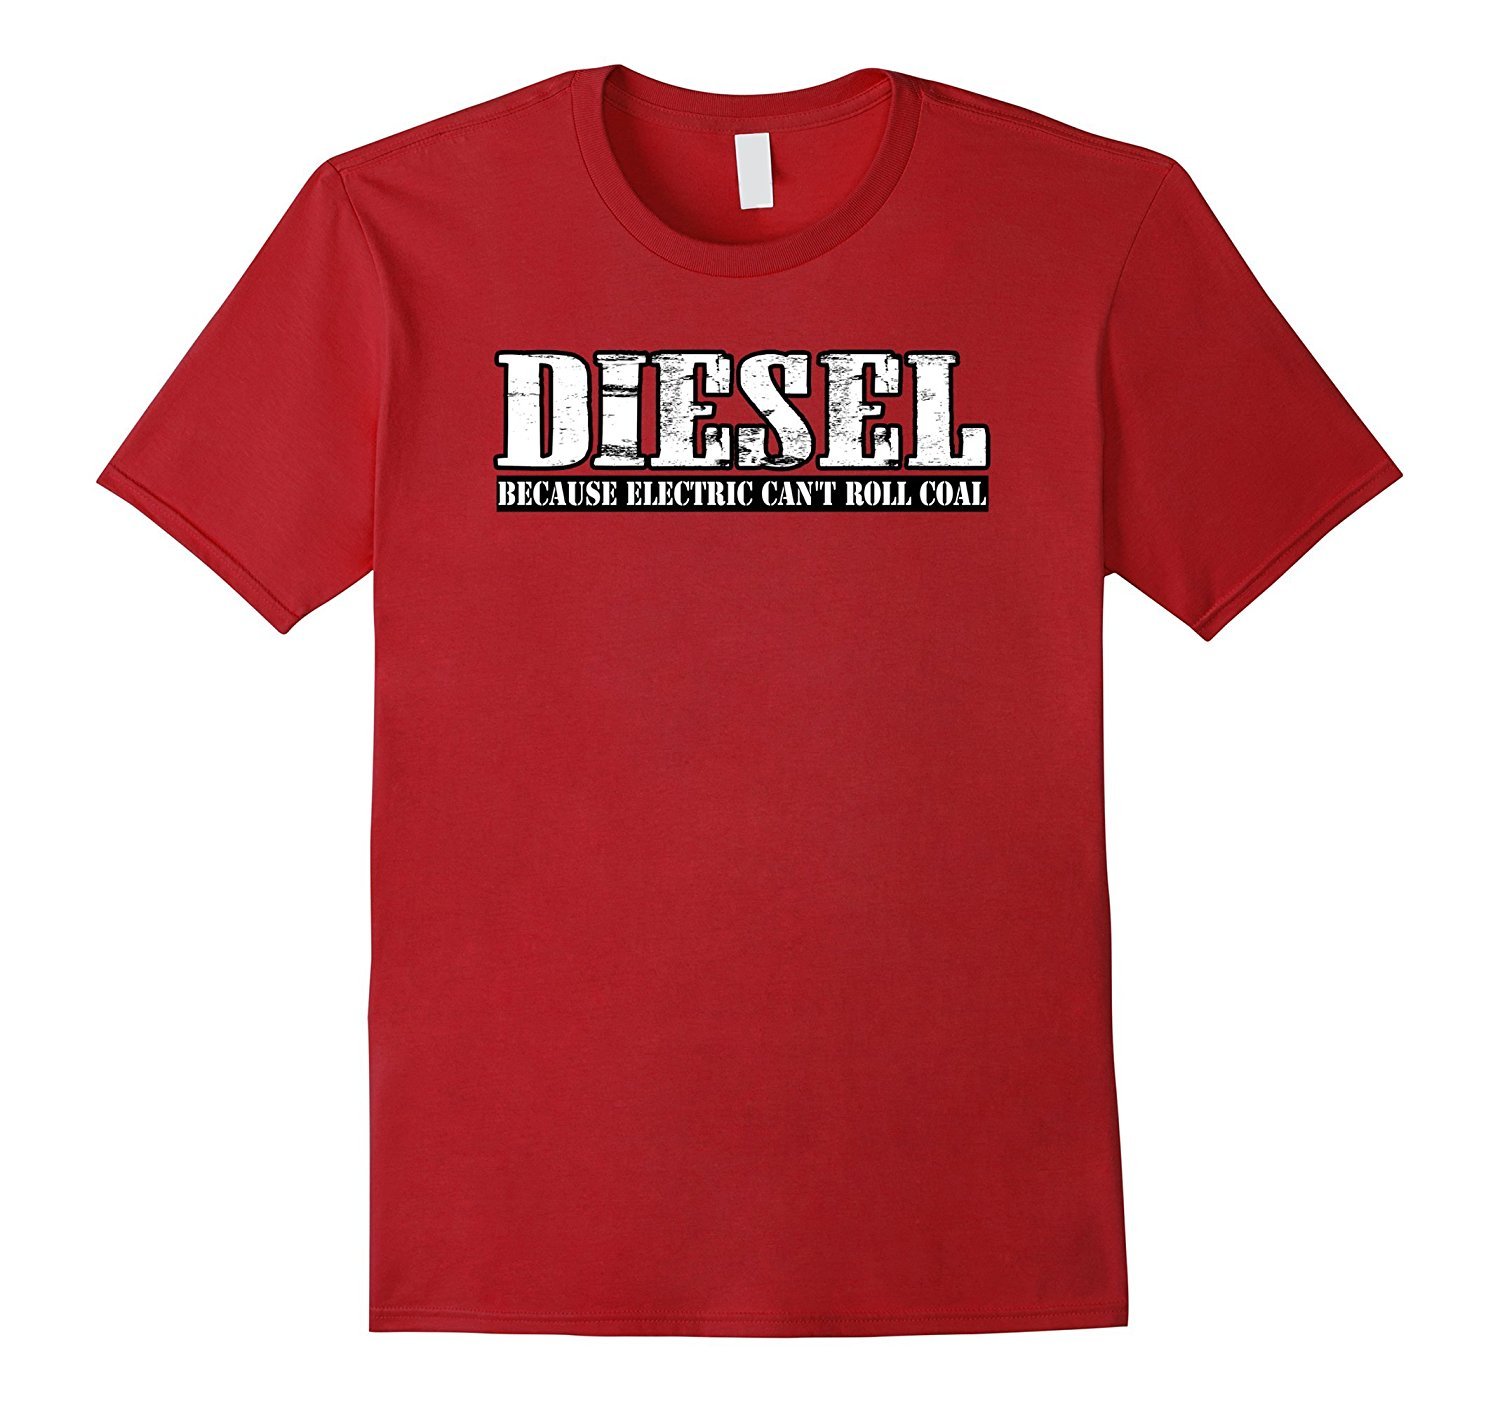 Diesel Diesel Because Electric Can't Roll Coal Truck T-Shirts Men - T ...